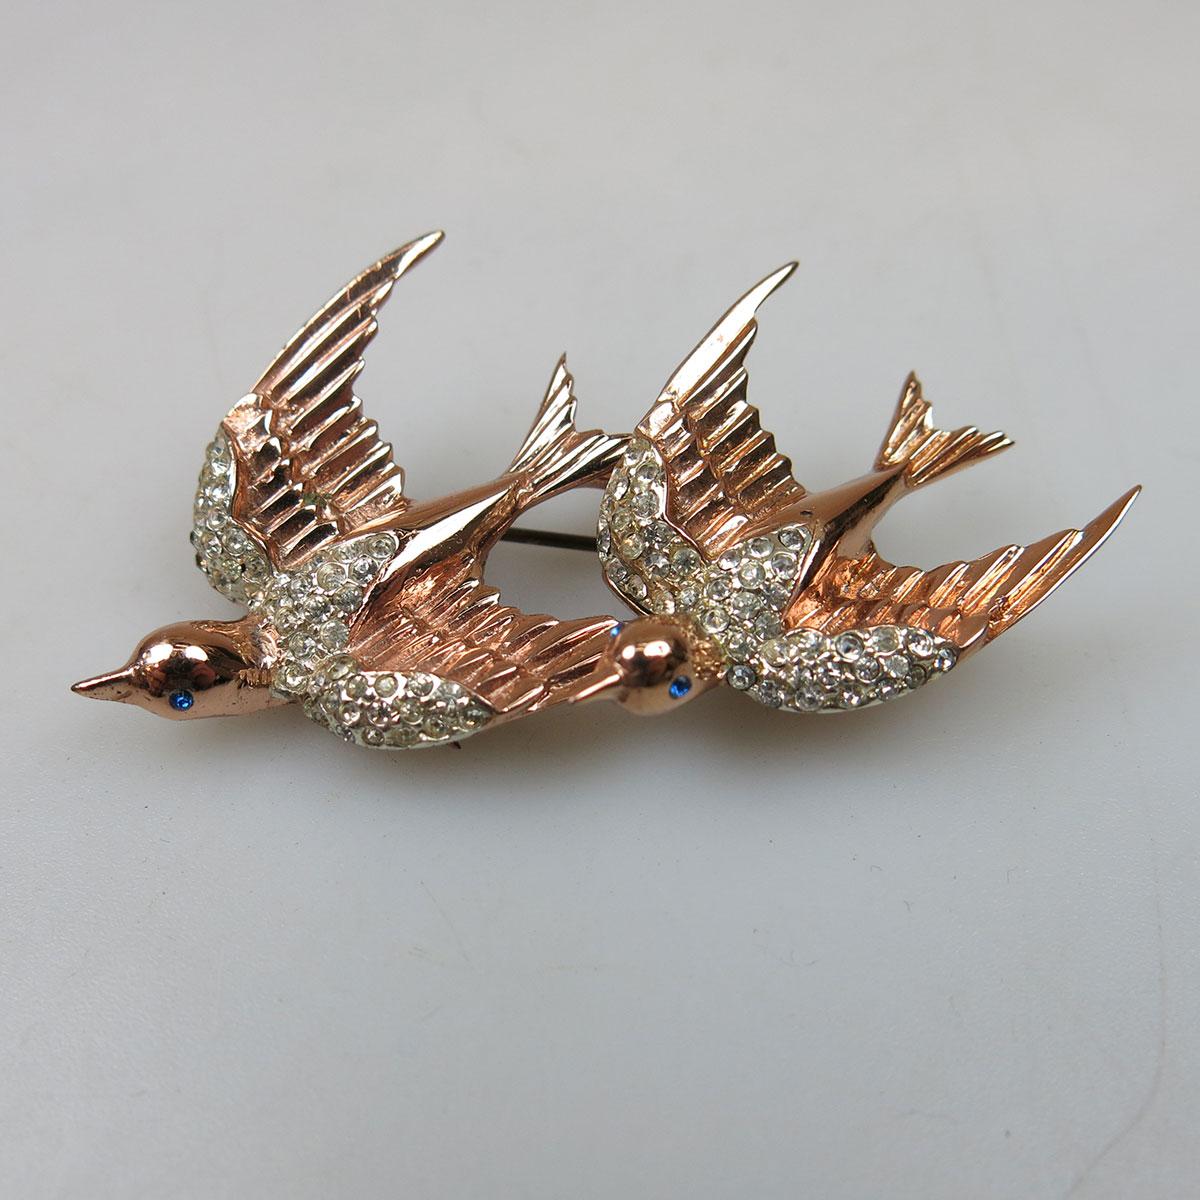 Coro-Craft Gold-Plated Sterling Silver Duette Pin